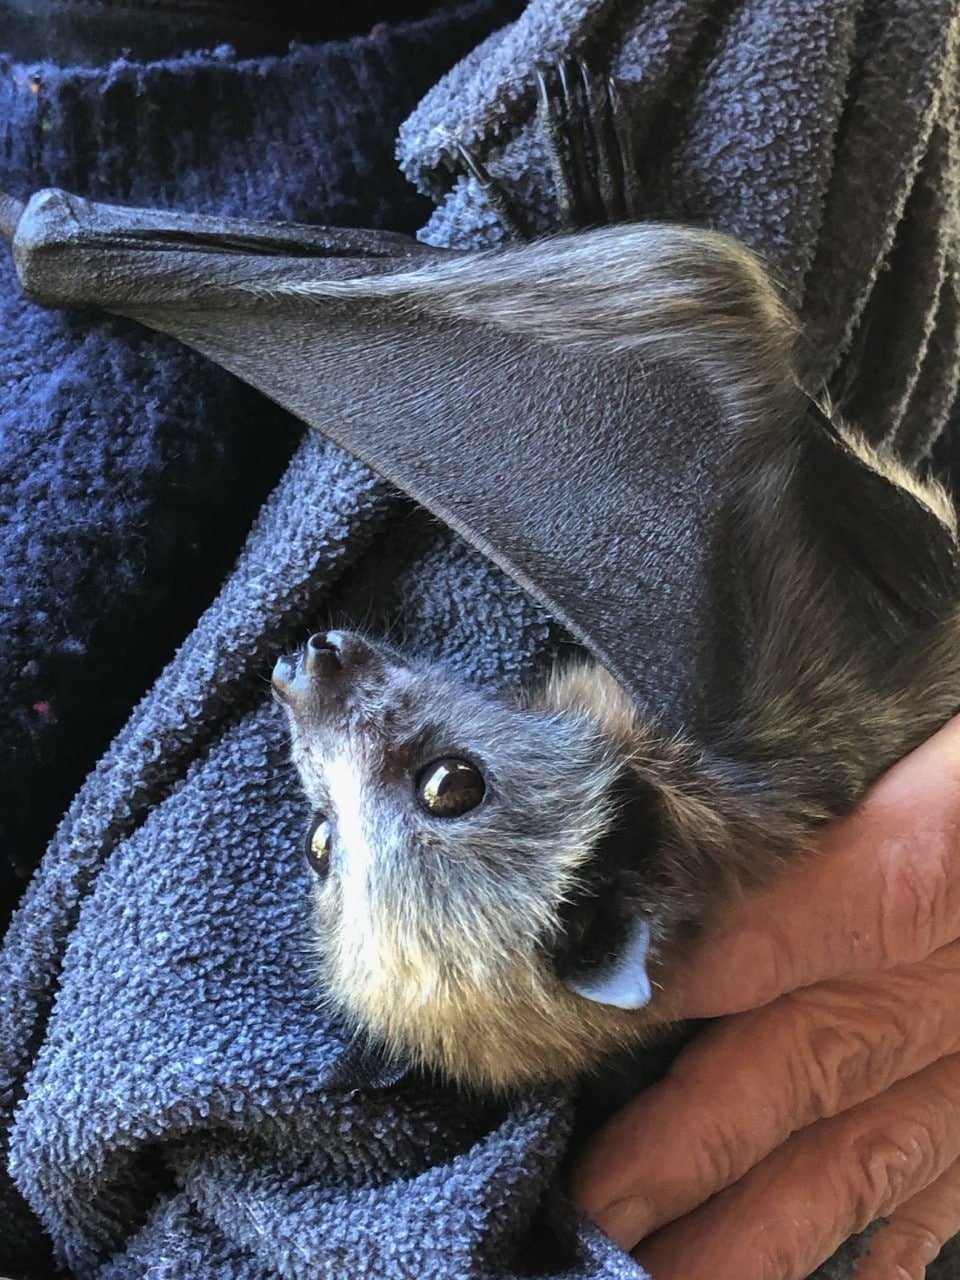 A rescued flying fox. Photo provided.